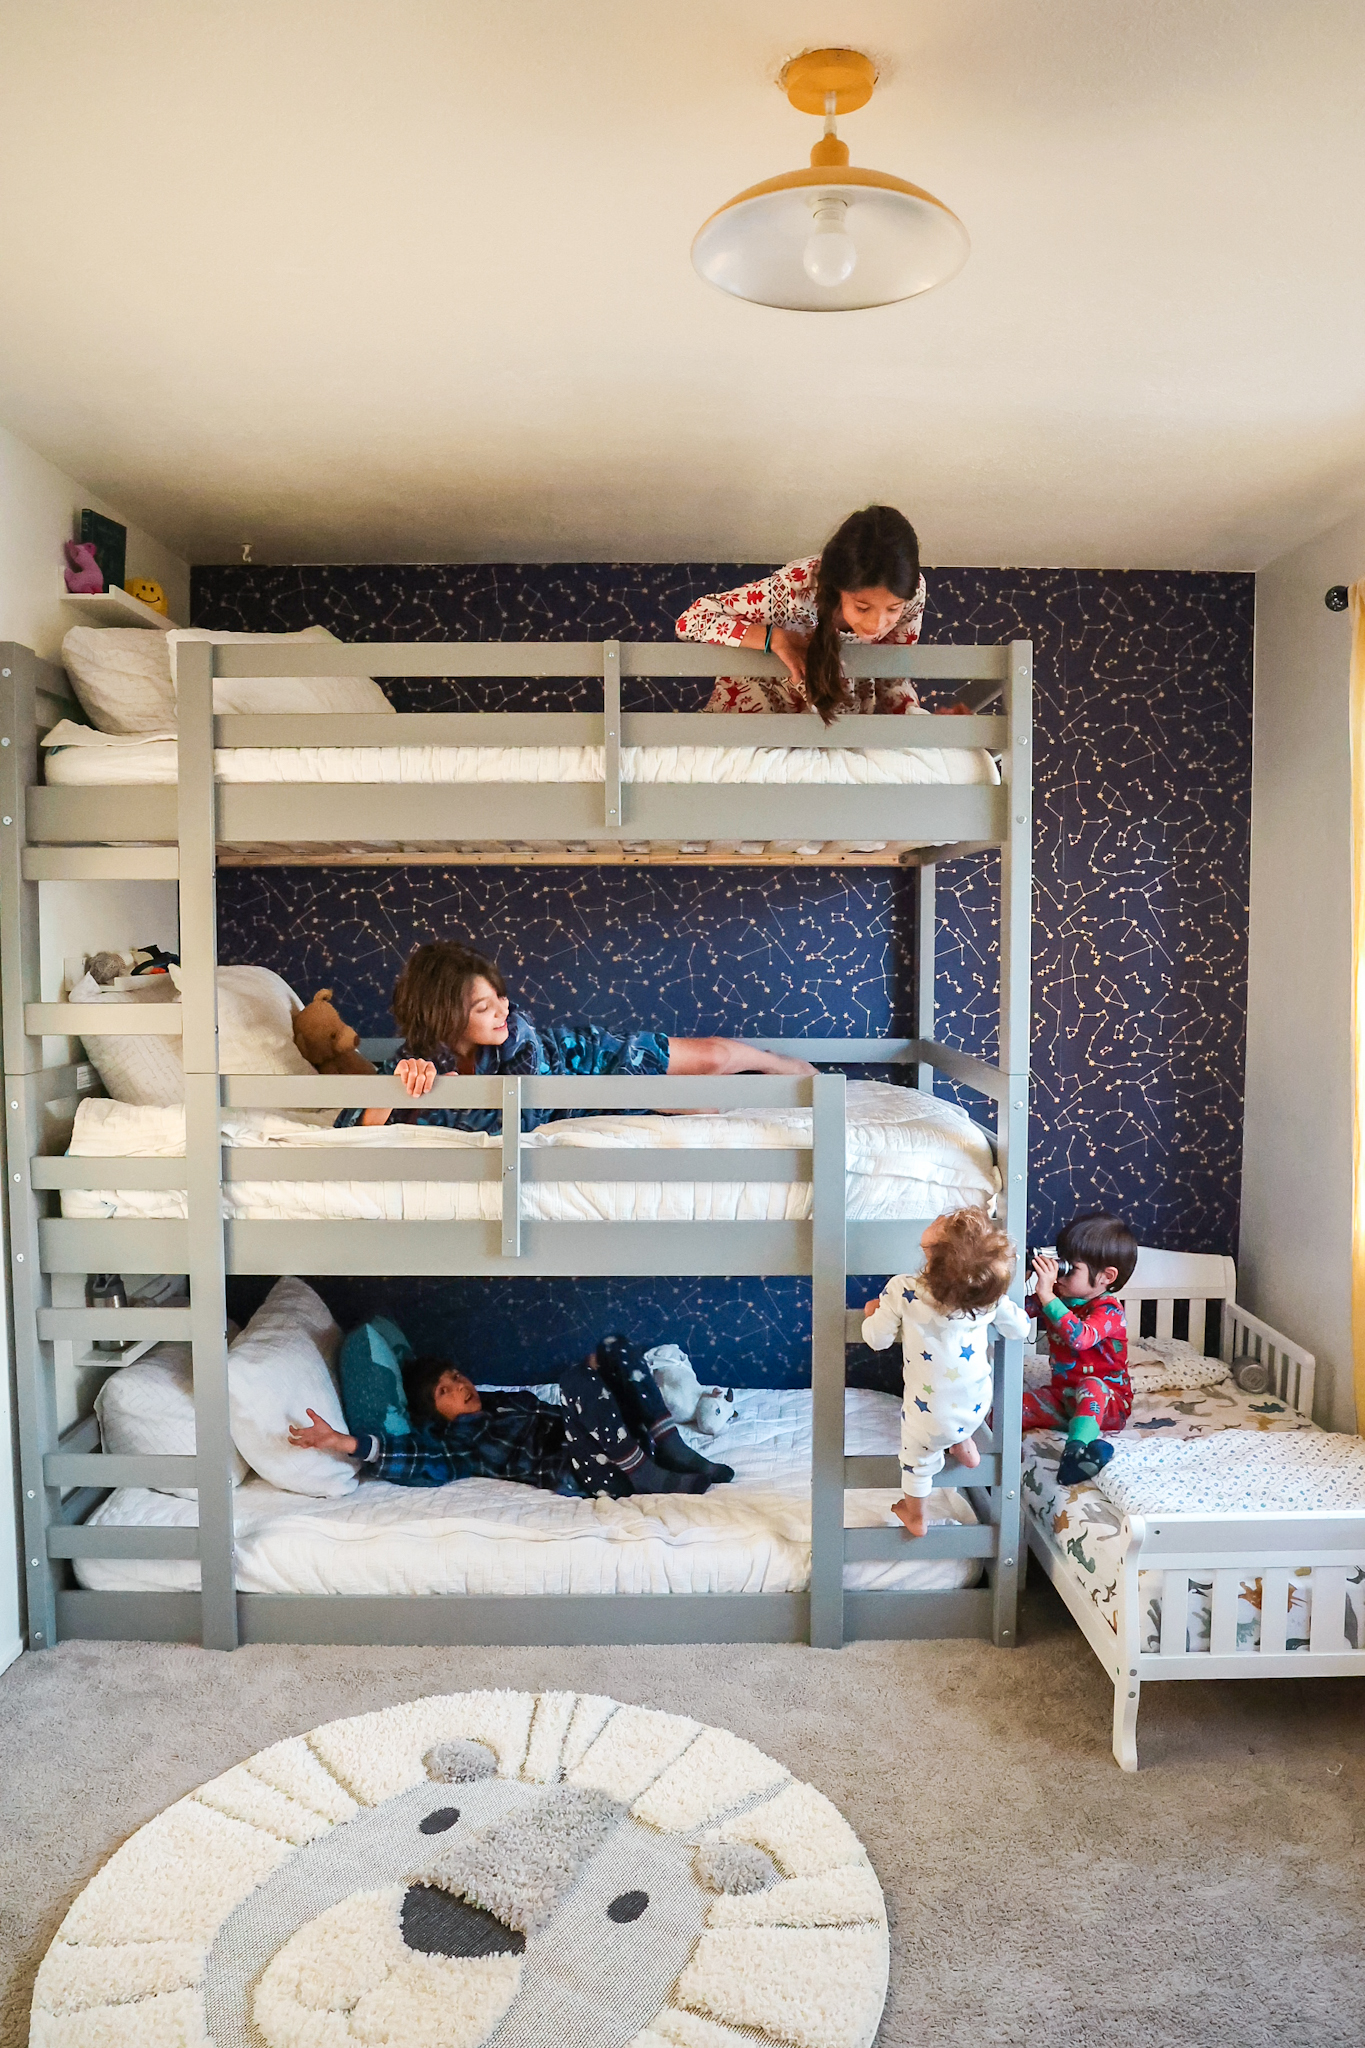 Our Kids Triple Bunk Room Local, Homemade Triple Bunk Beds